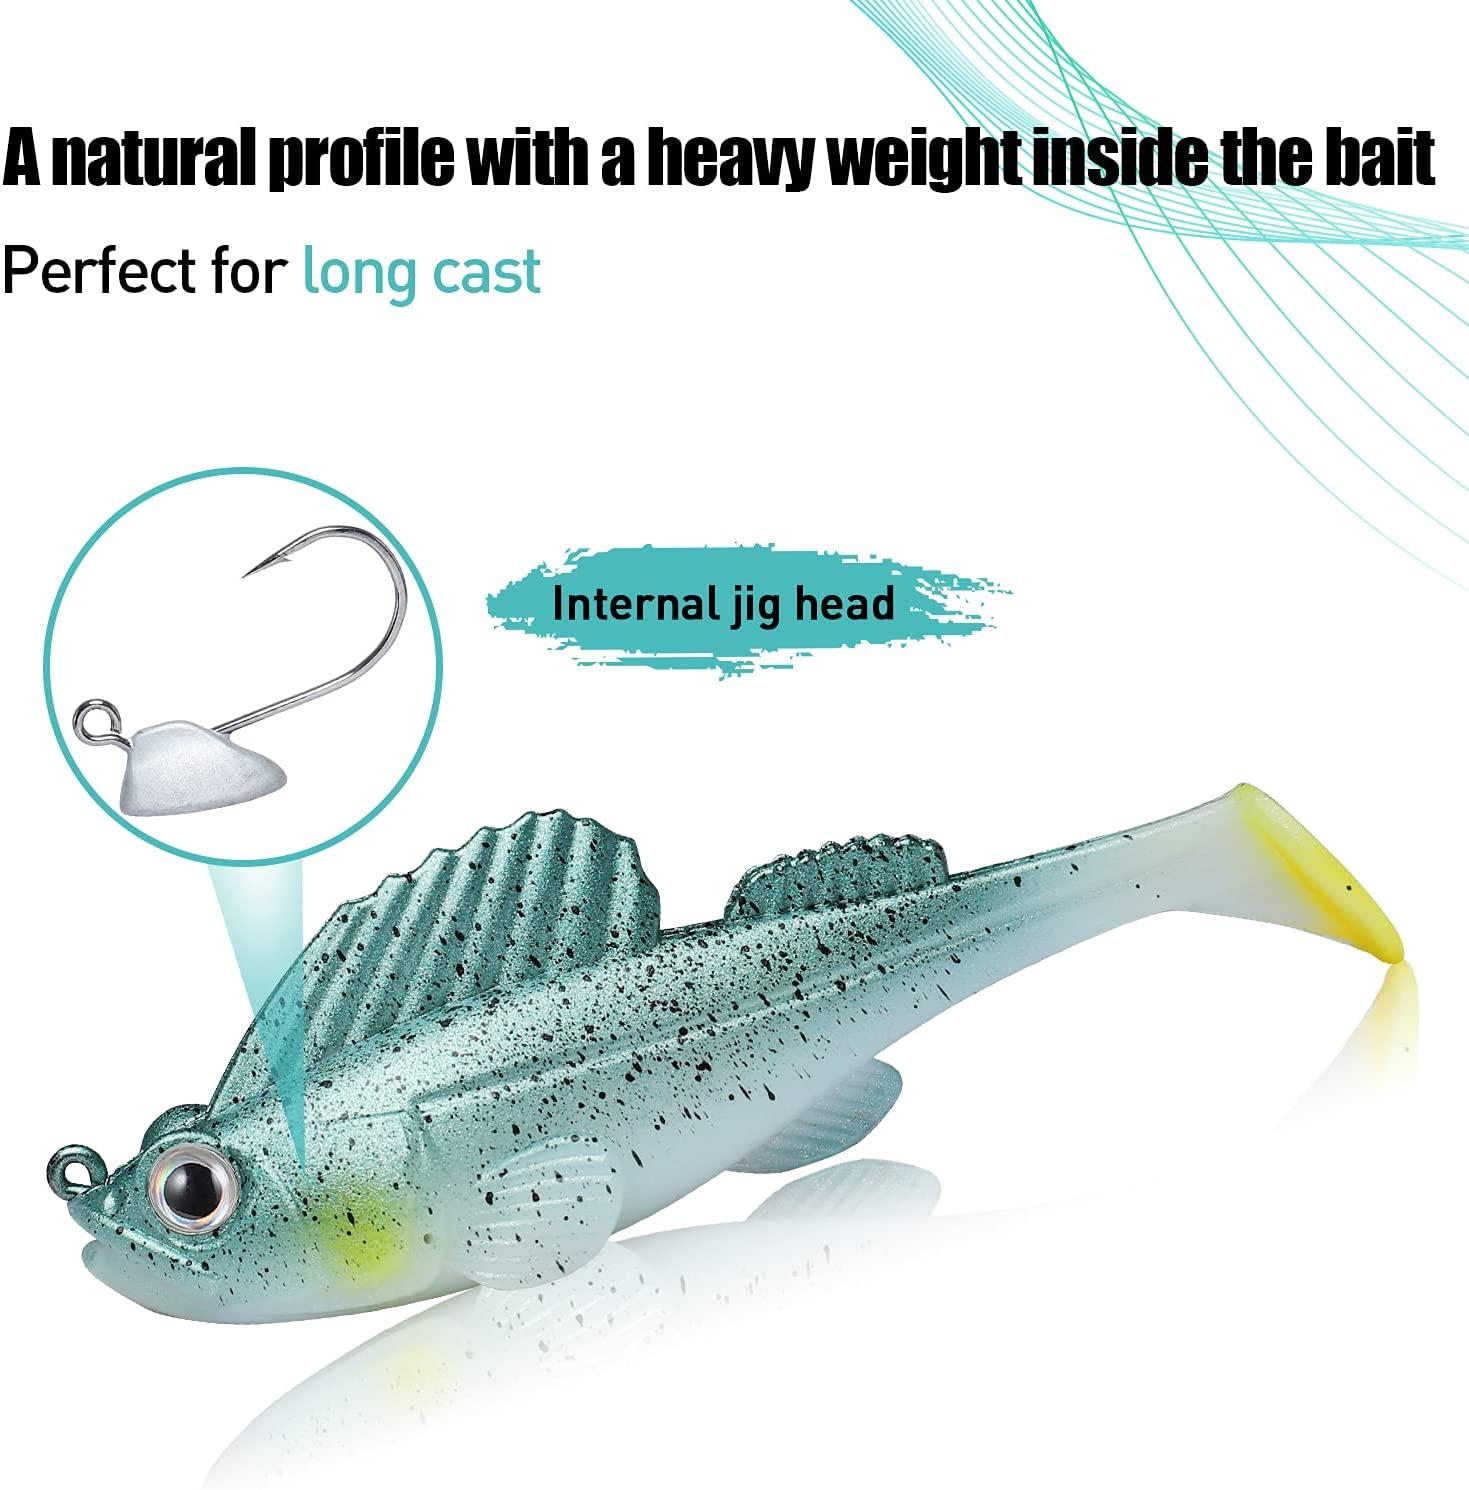 TRUSCEND Weedless Soft Fishing Lures for Bass Pre-Rigged Swimbait with BKK  Hook Paddle Tail Fishing Baits for Freshwater Jighead Lures TPE Swimbaits  Bass Trout Crappie Walleye Pike Fishing Jigs A-2.8-0.4oz